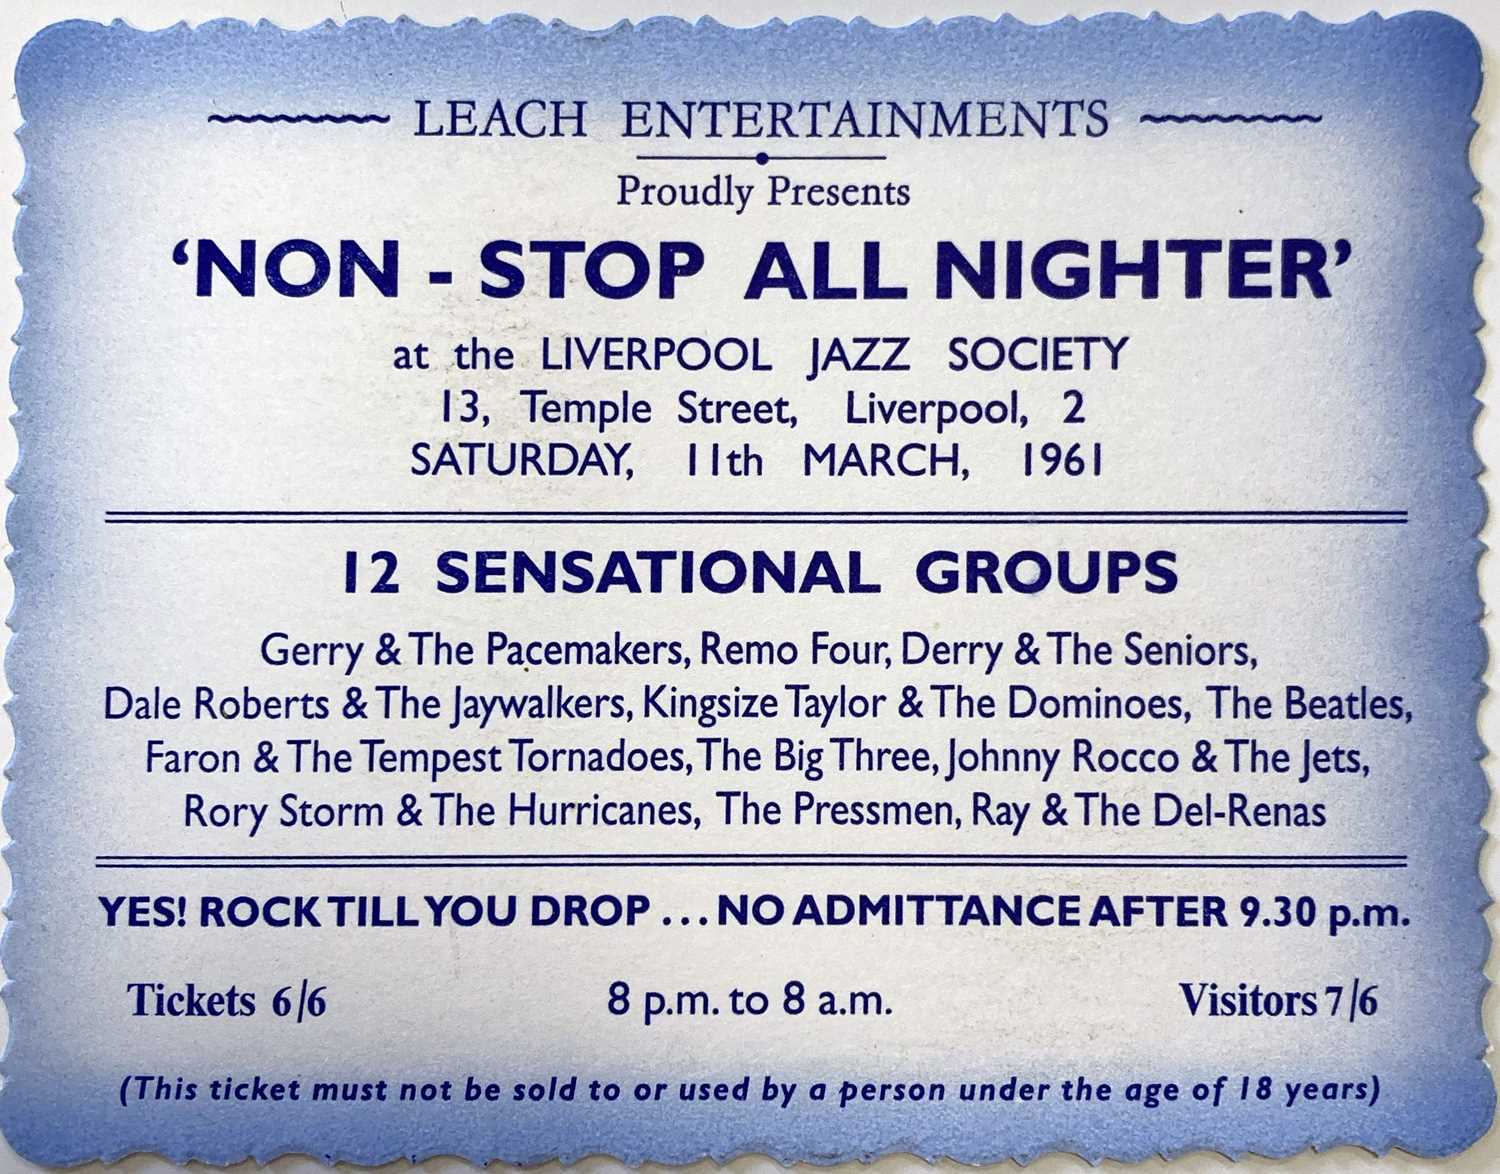 Lot 312 - BEATLES NON STOP ALL NIGHTER TICKET.